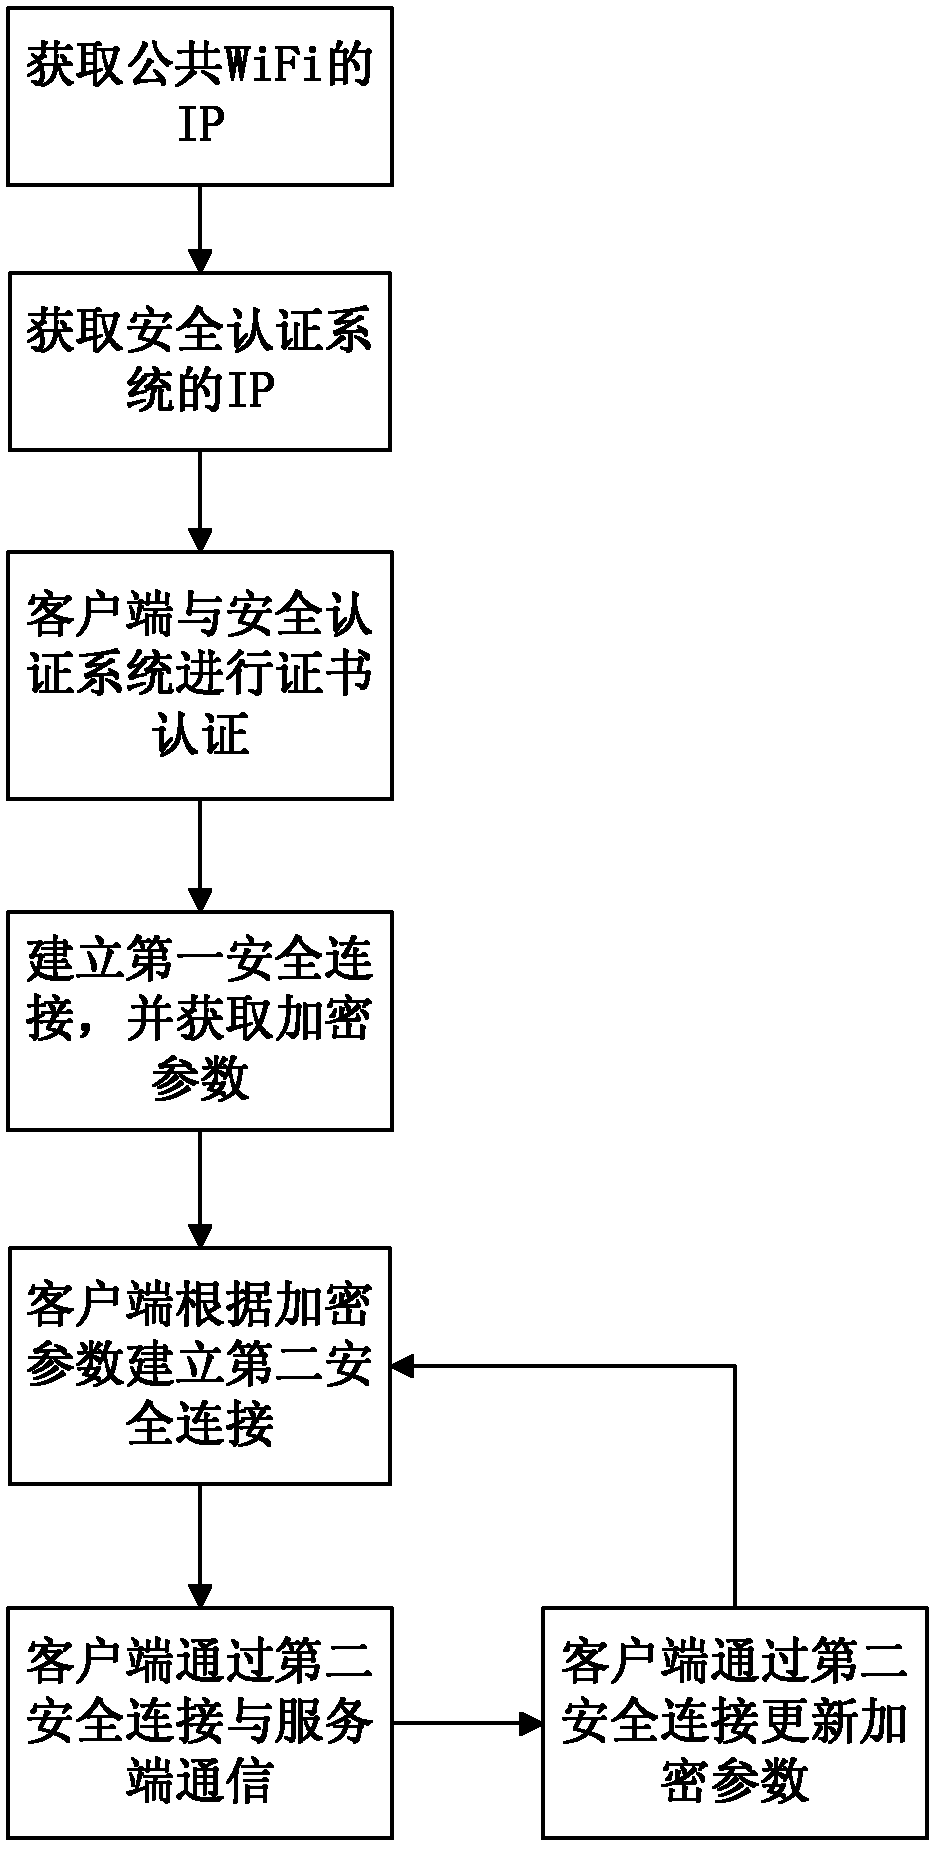 Security authentication method for wireless network